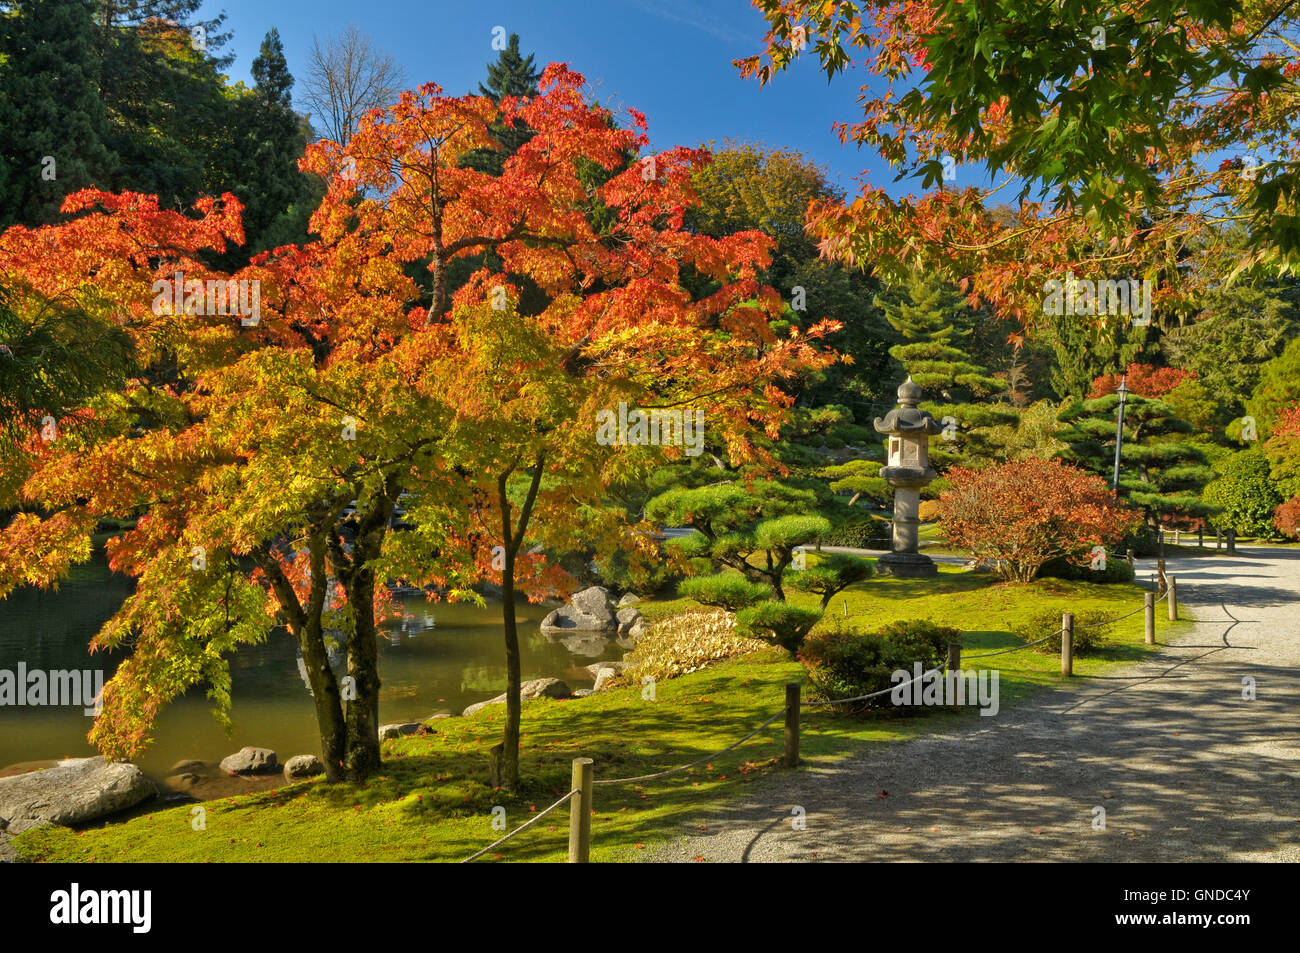 Colorful Autumn Trees along Winding Path and Pond in Japanese Garden. Landscape. Stock Photo